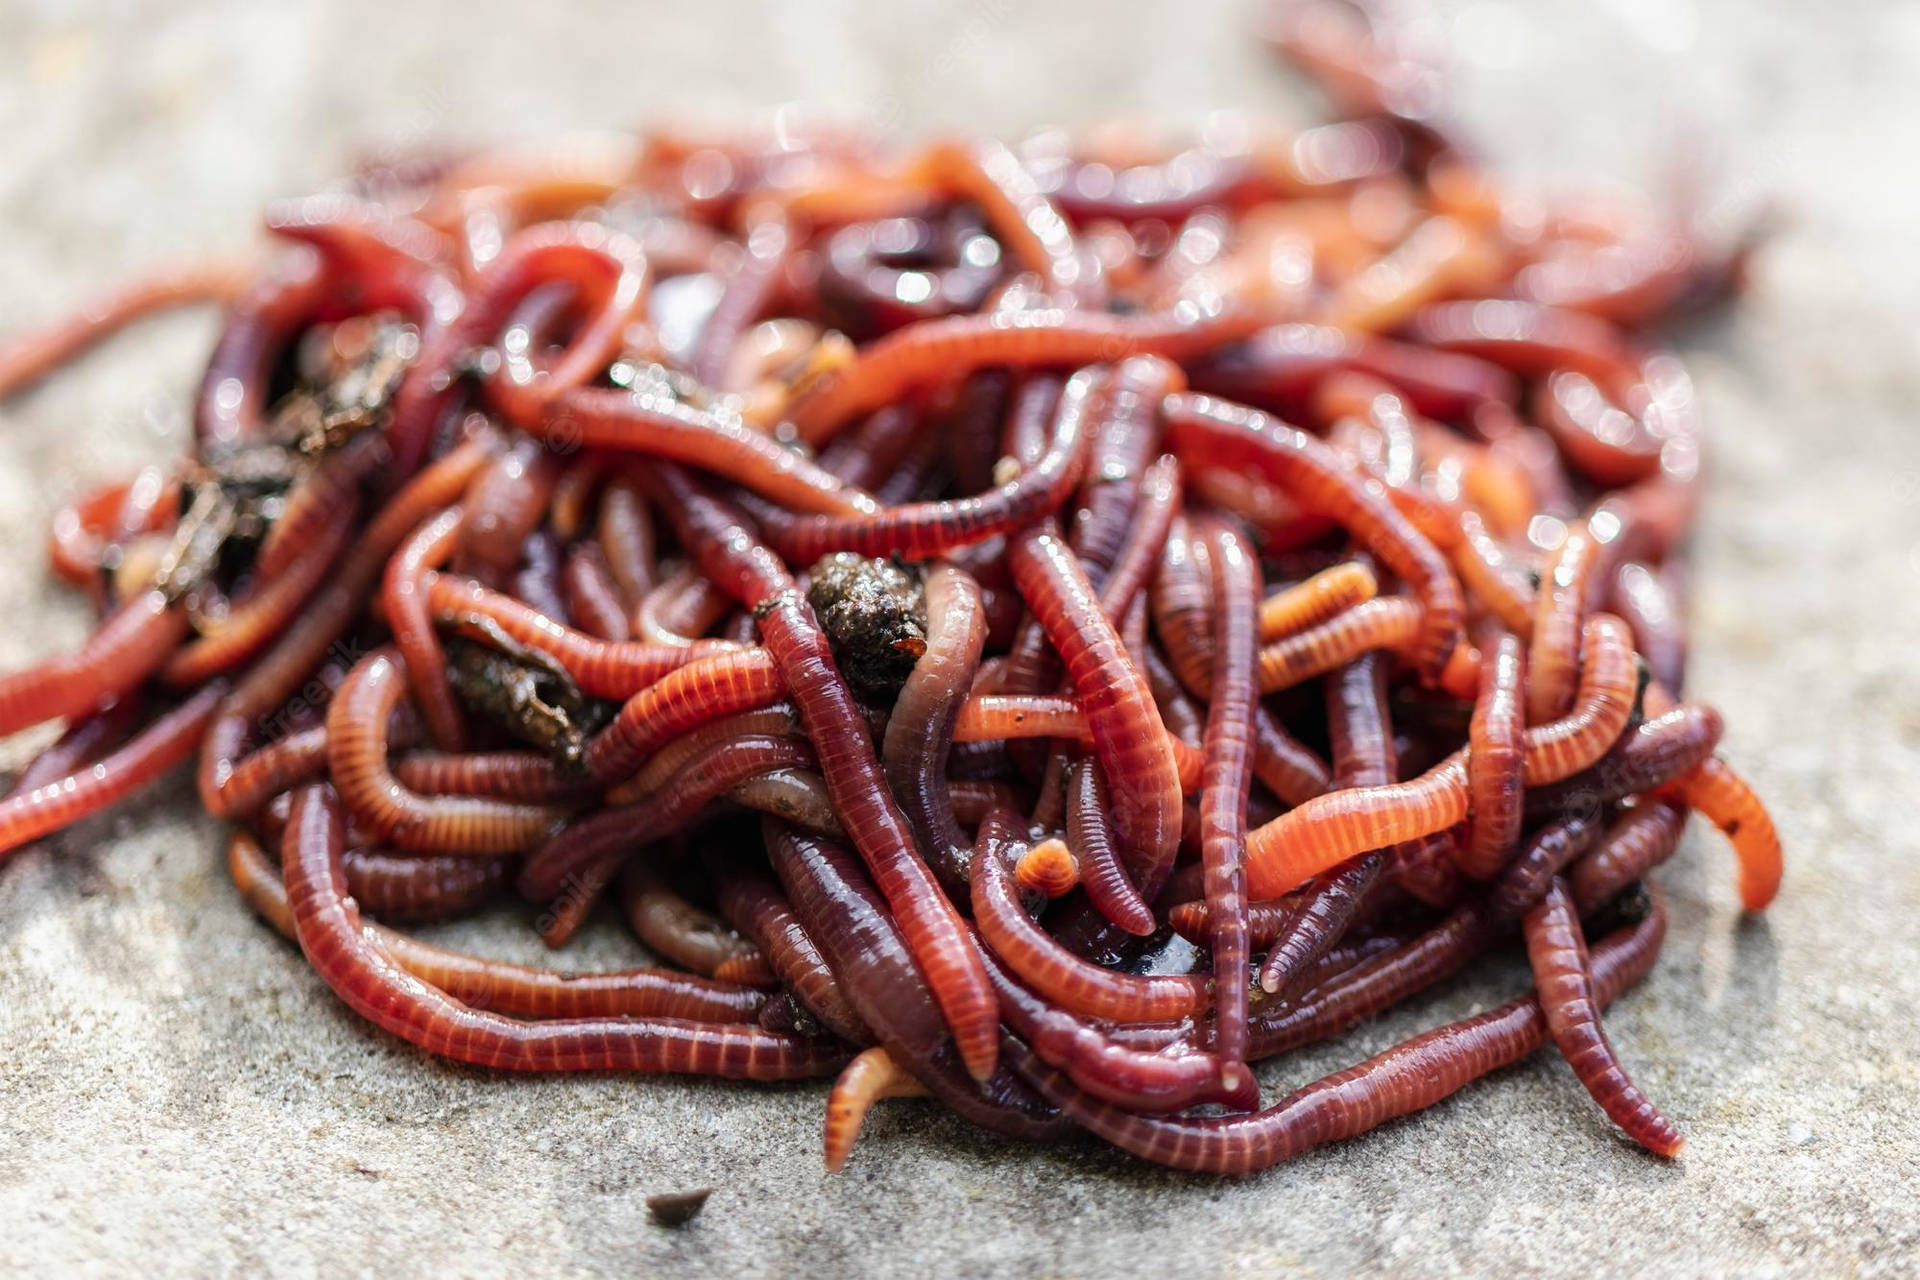 Close-up View of Earthworms Thriving in Nutrient-rich Manure Wallpaper